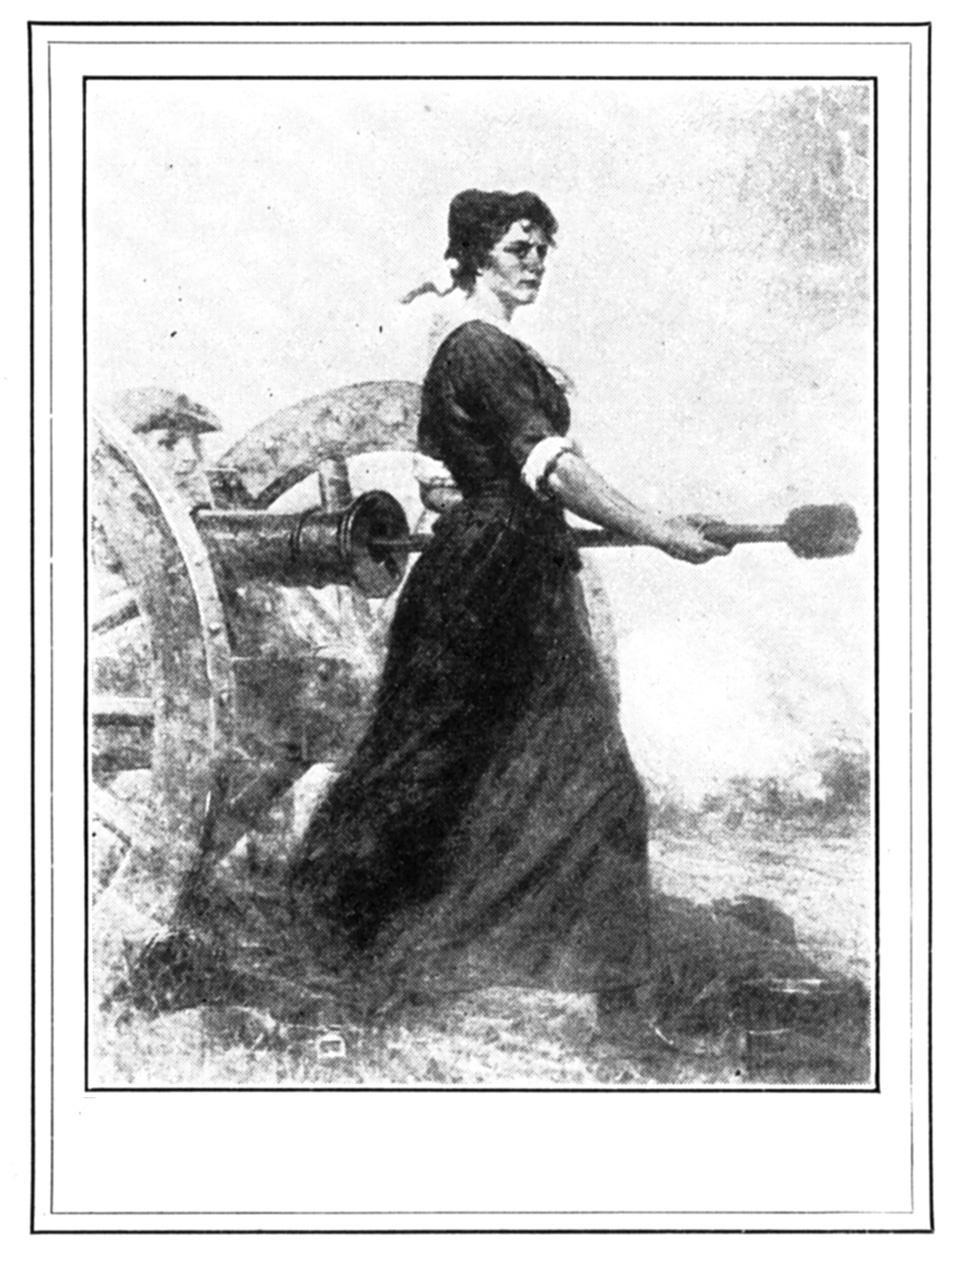 Molly Pitcher Real name was Mary Hays McCauly Nicknamed Molly Pitcher because she carried water to the men manning the artillery in battle as well as bringing water to cool down the cannon